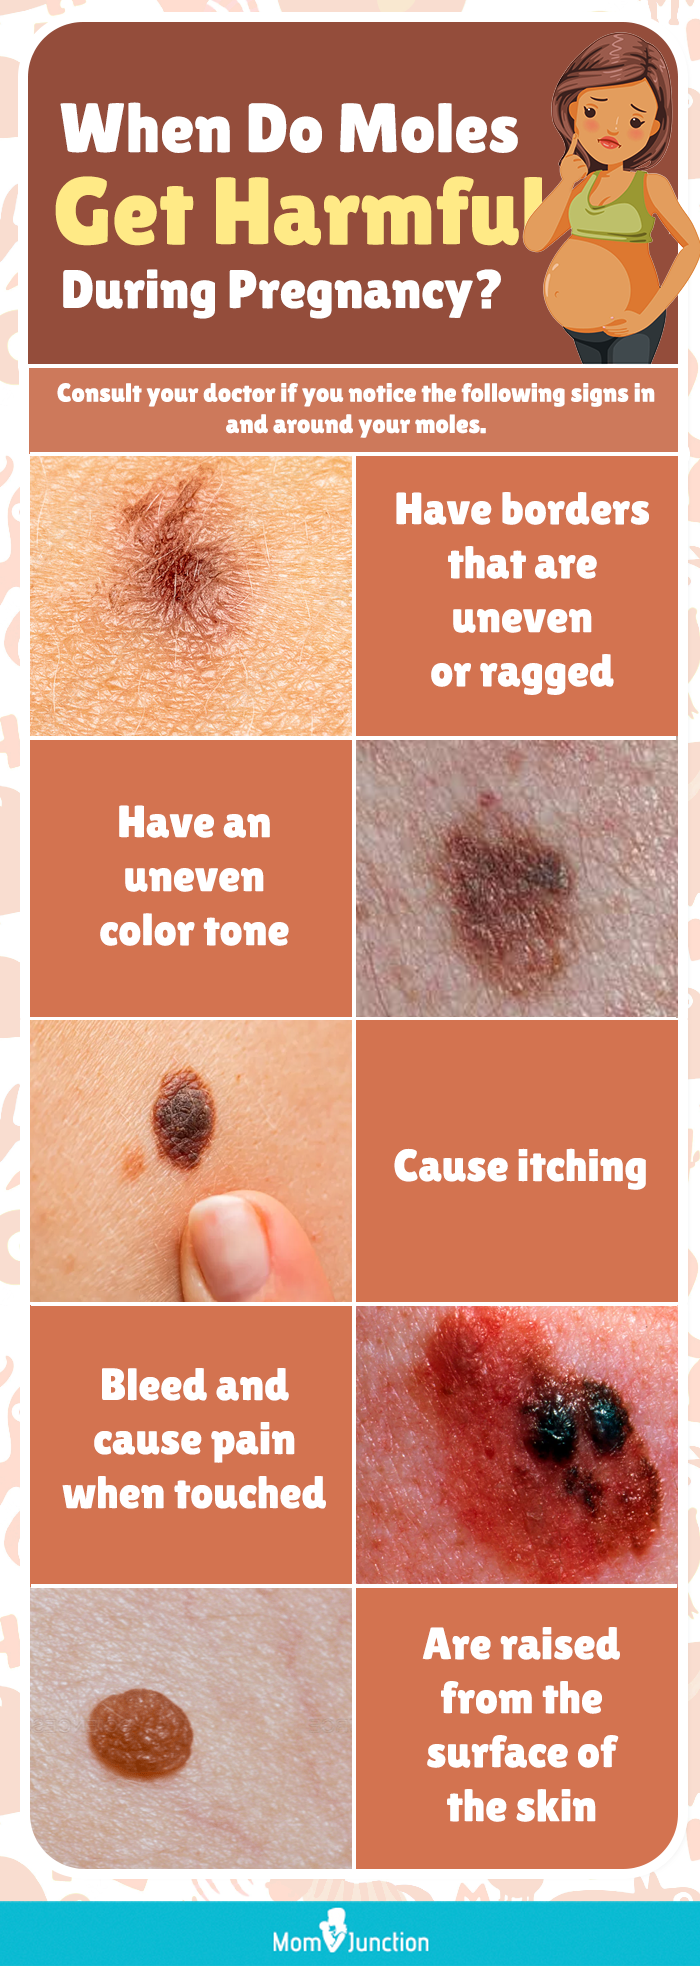 when do moles get harmful [infographic]